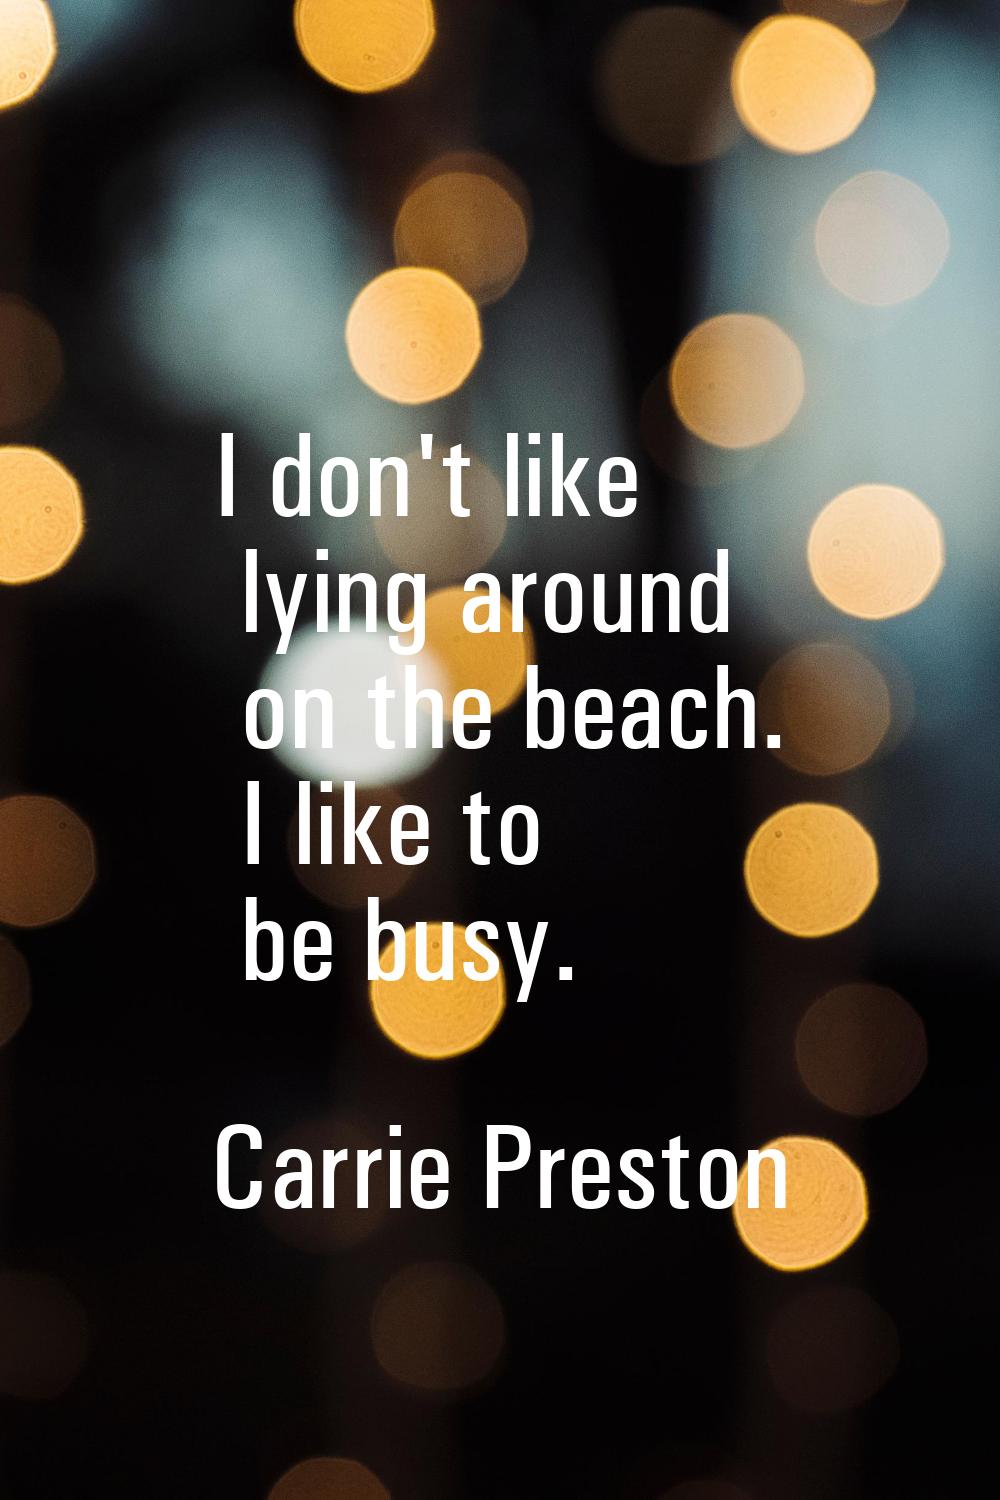 I don't like lying around on the beach. I like to be busy.